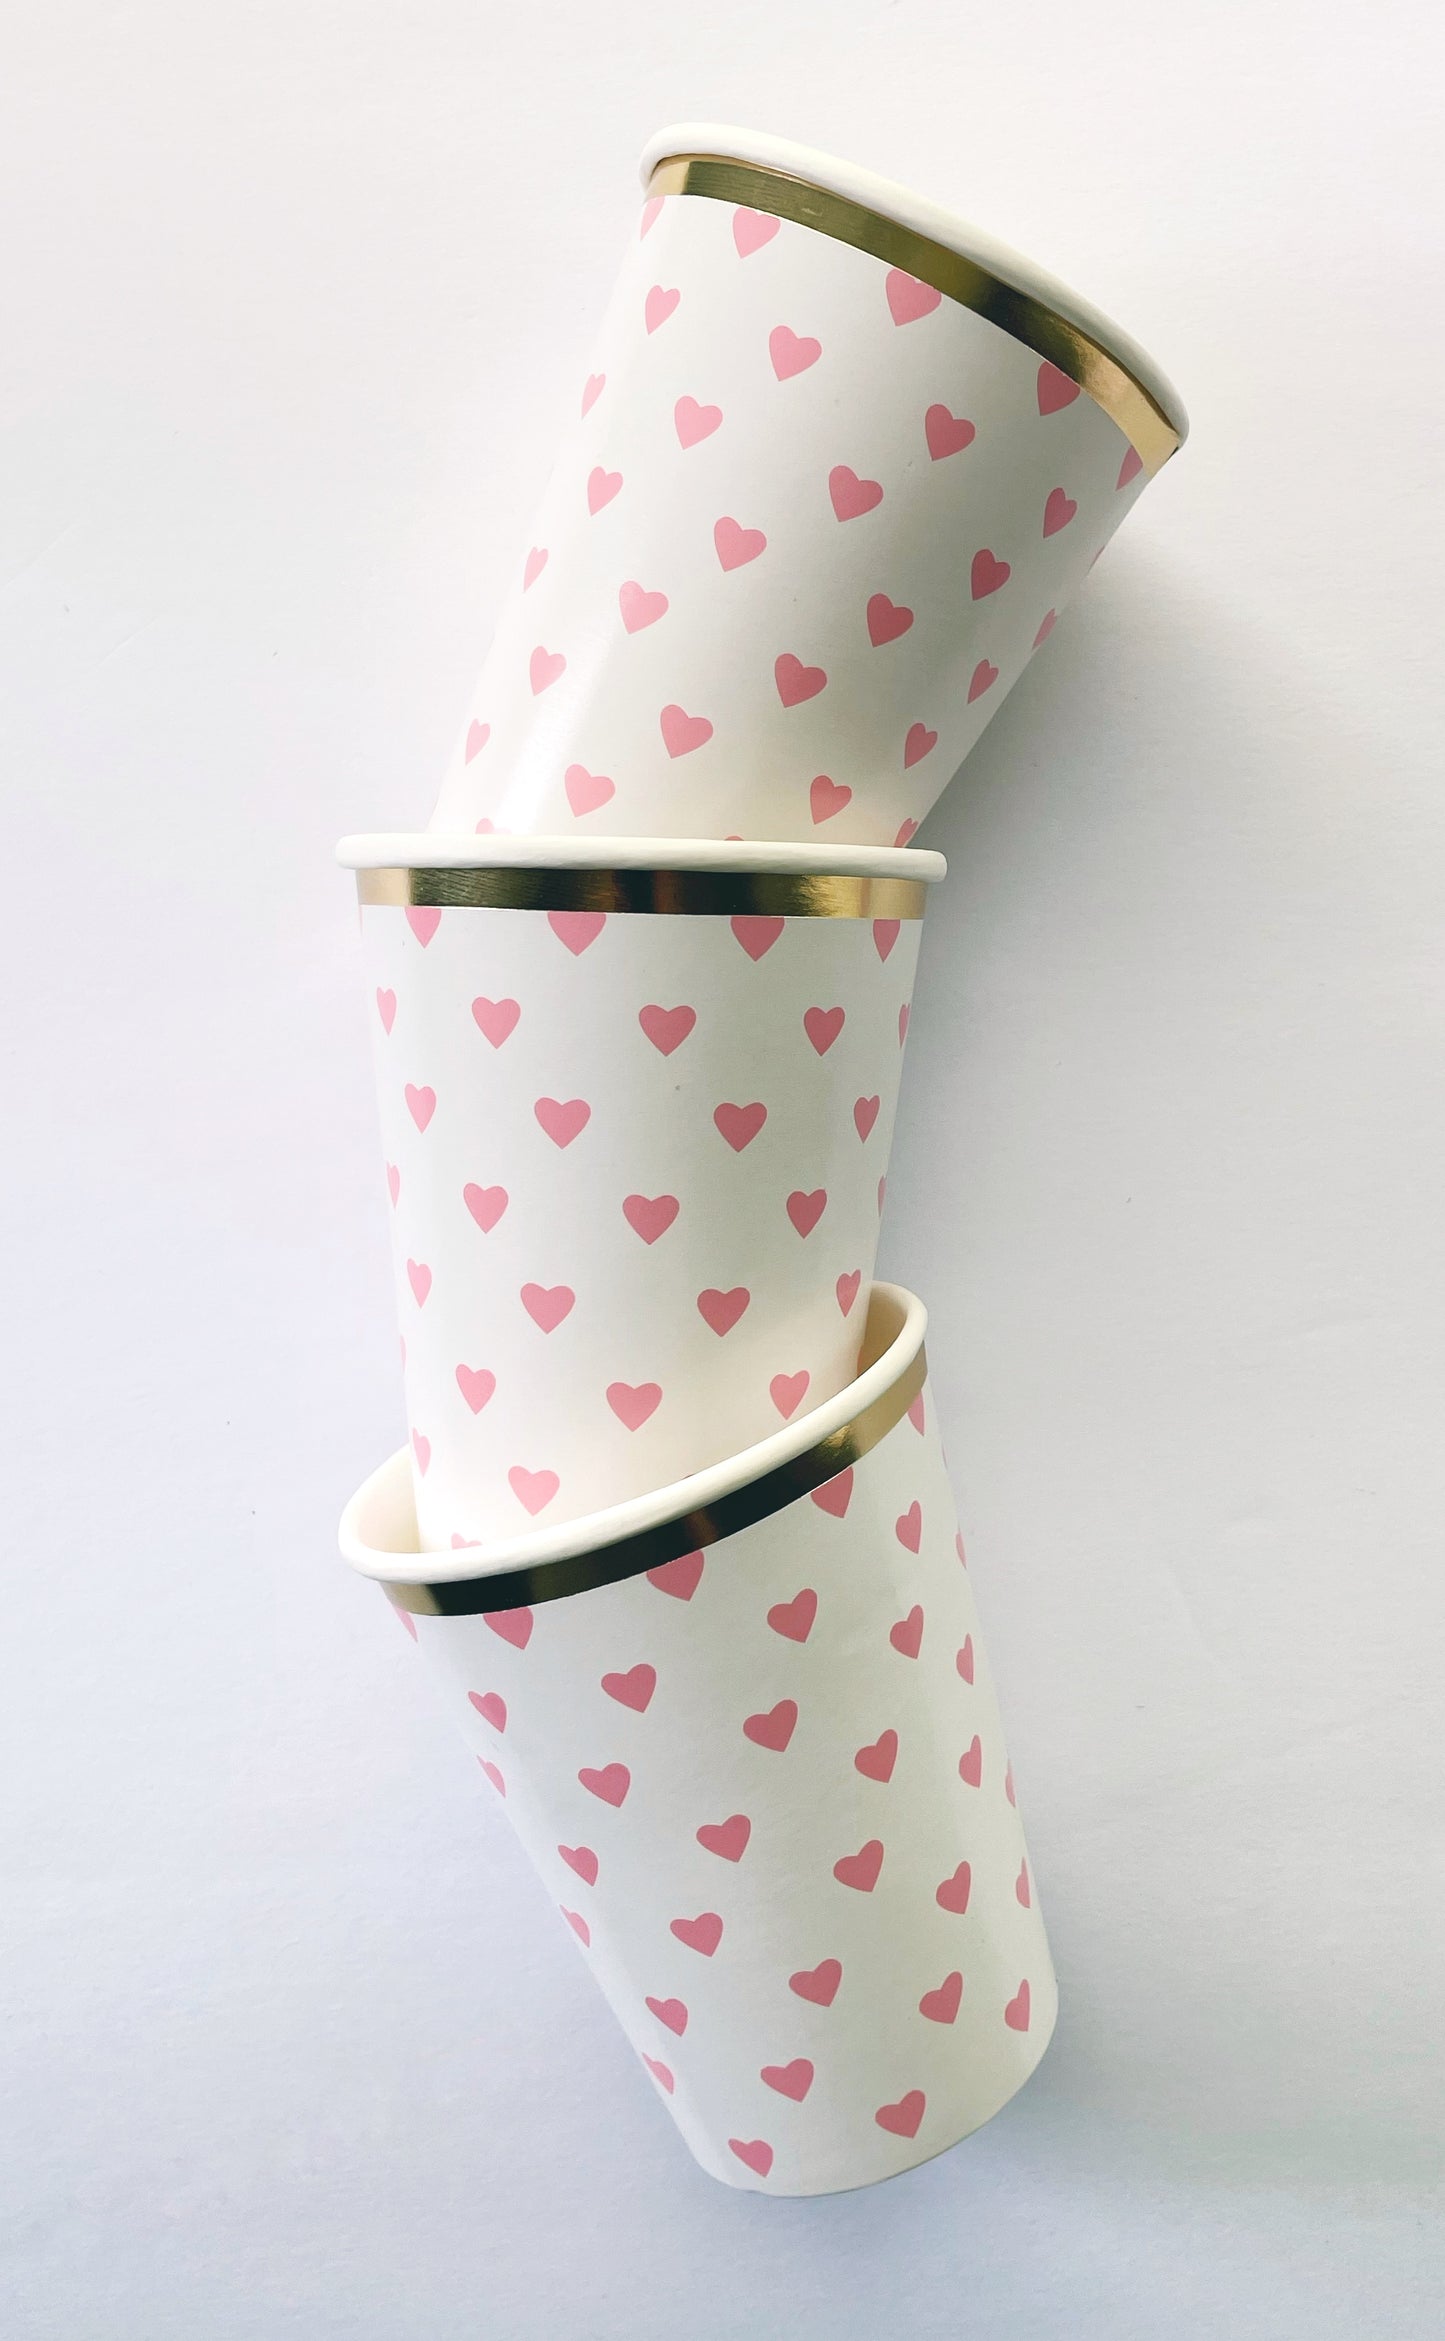 Pink and white party cups with gold foil detail. The cups have a pink heart pattern on them.